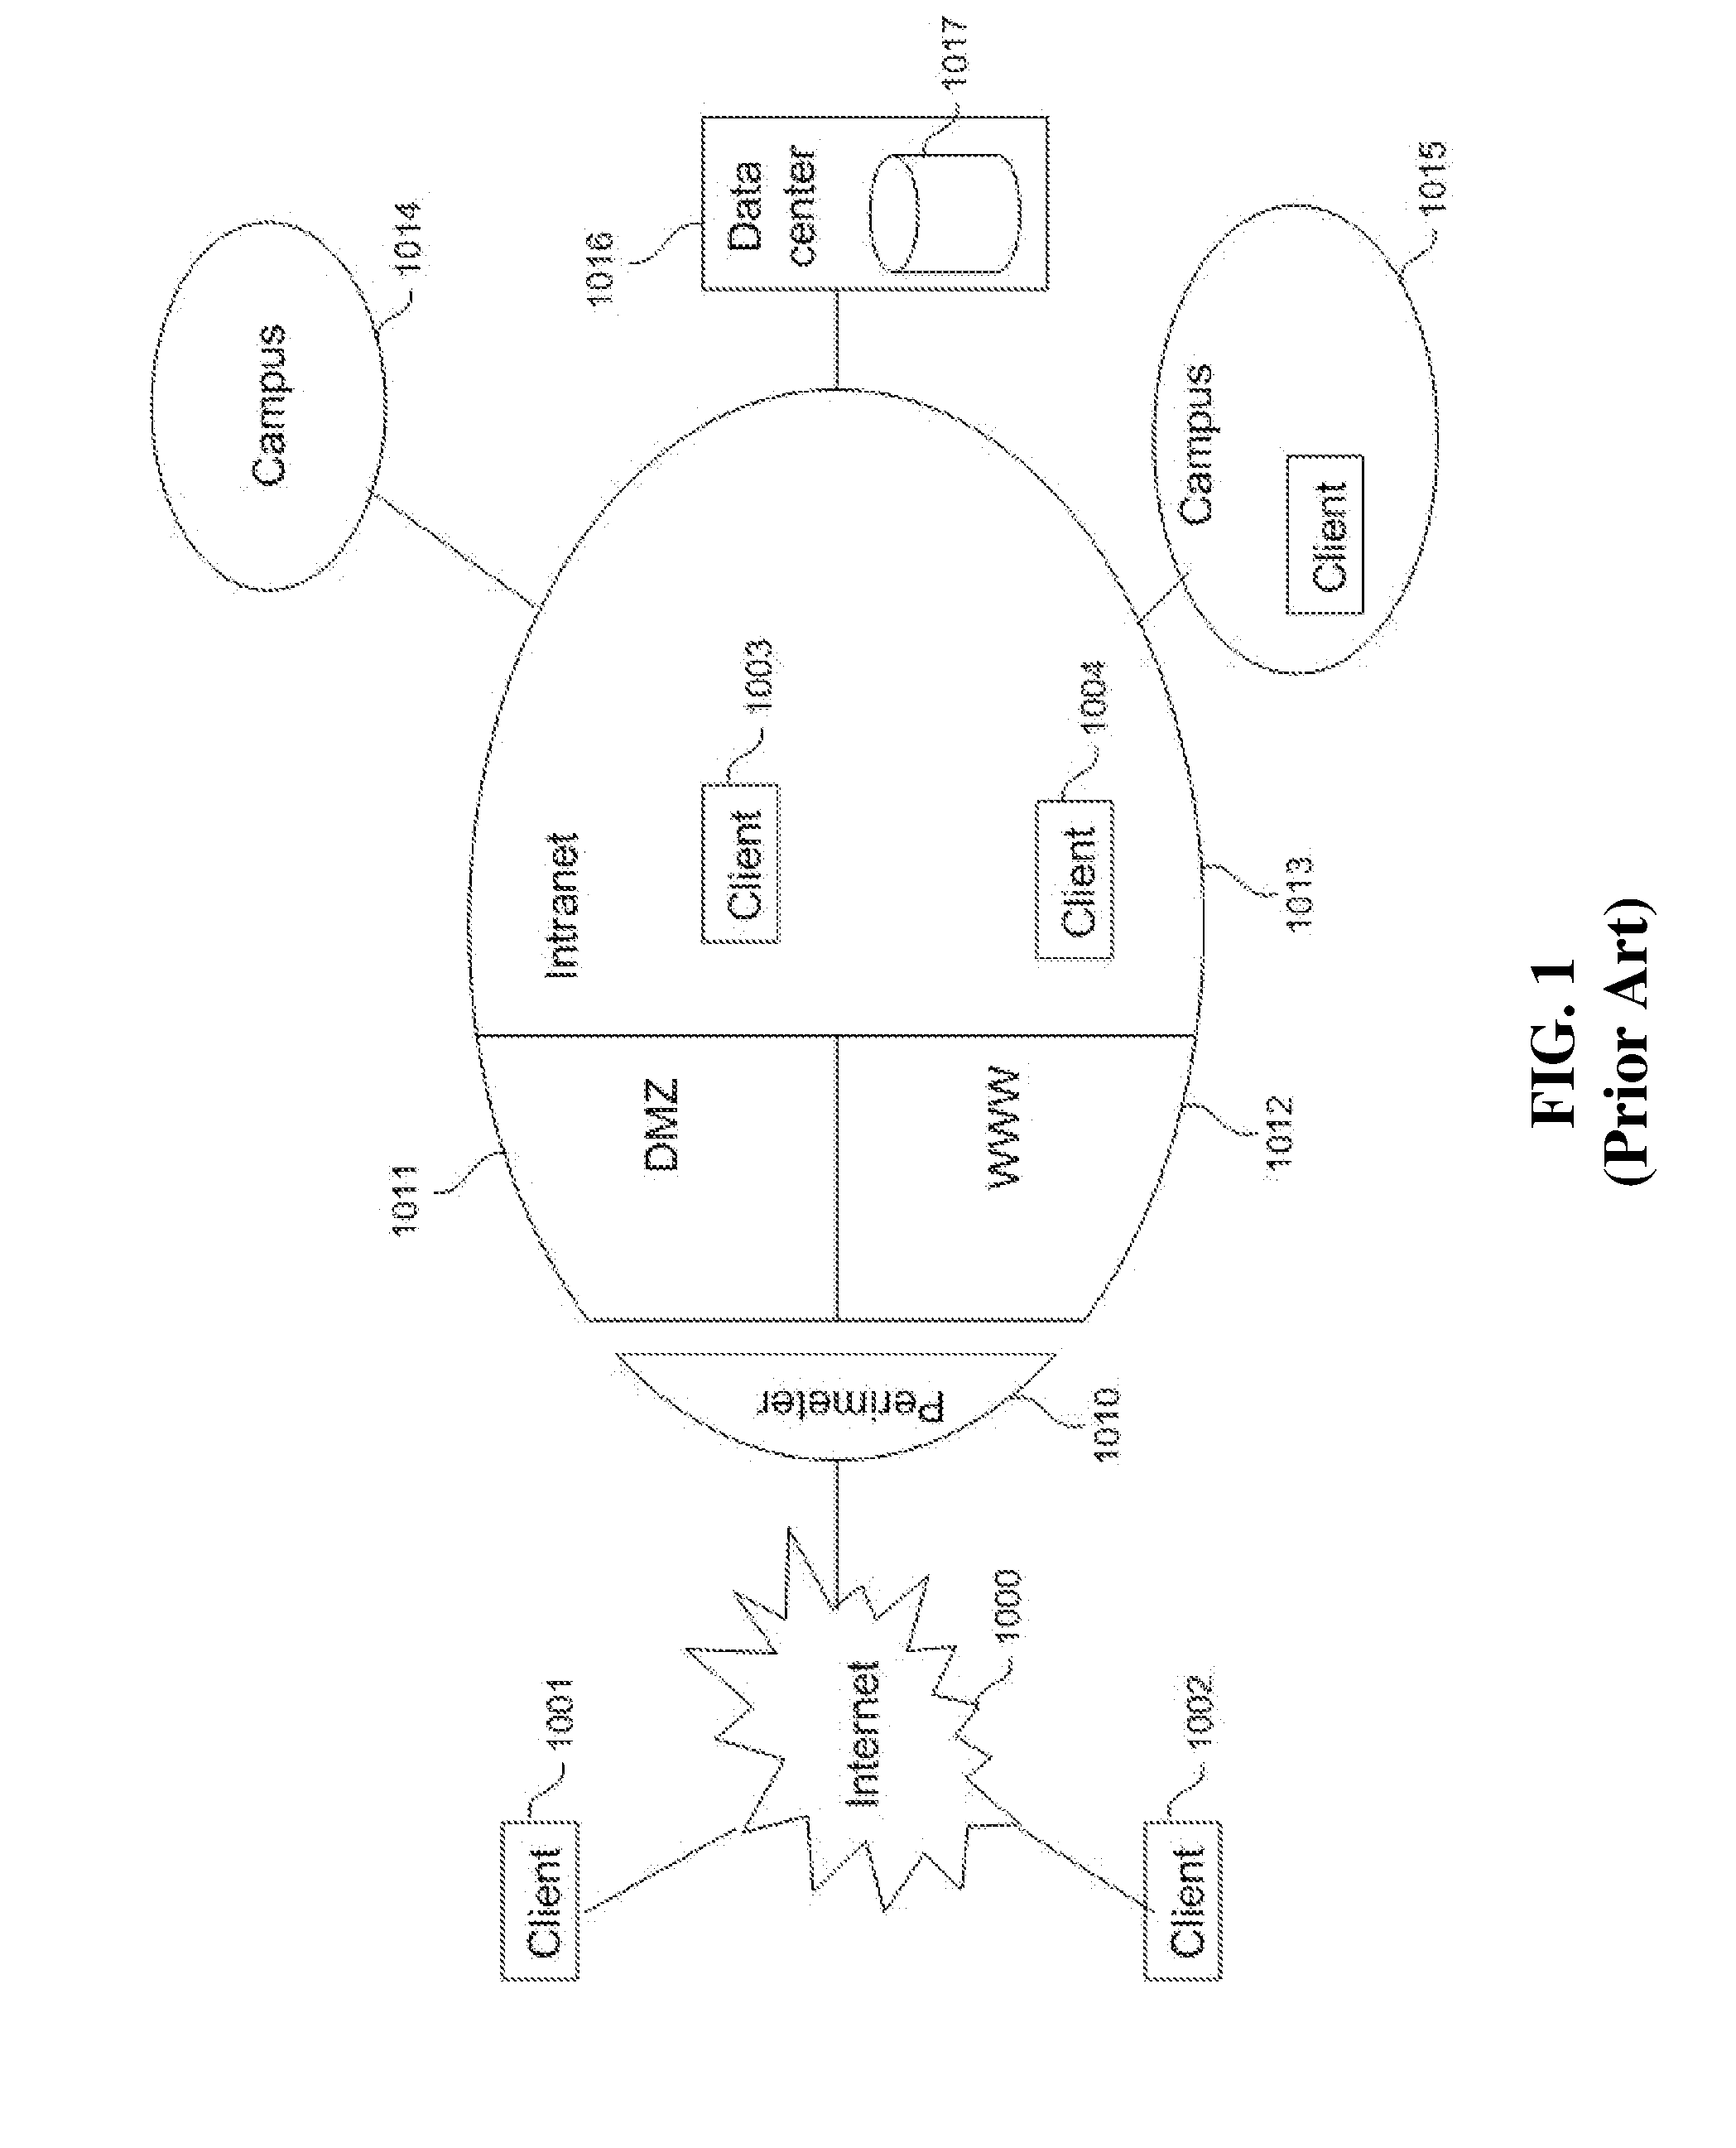 Application network appliance with built-in virtual directory interface